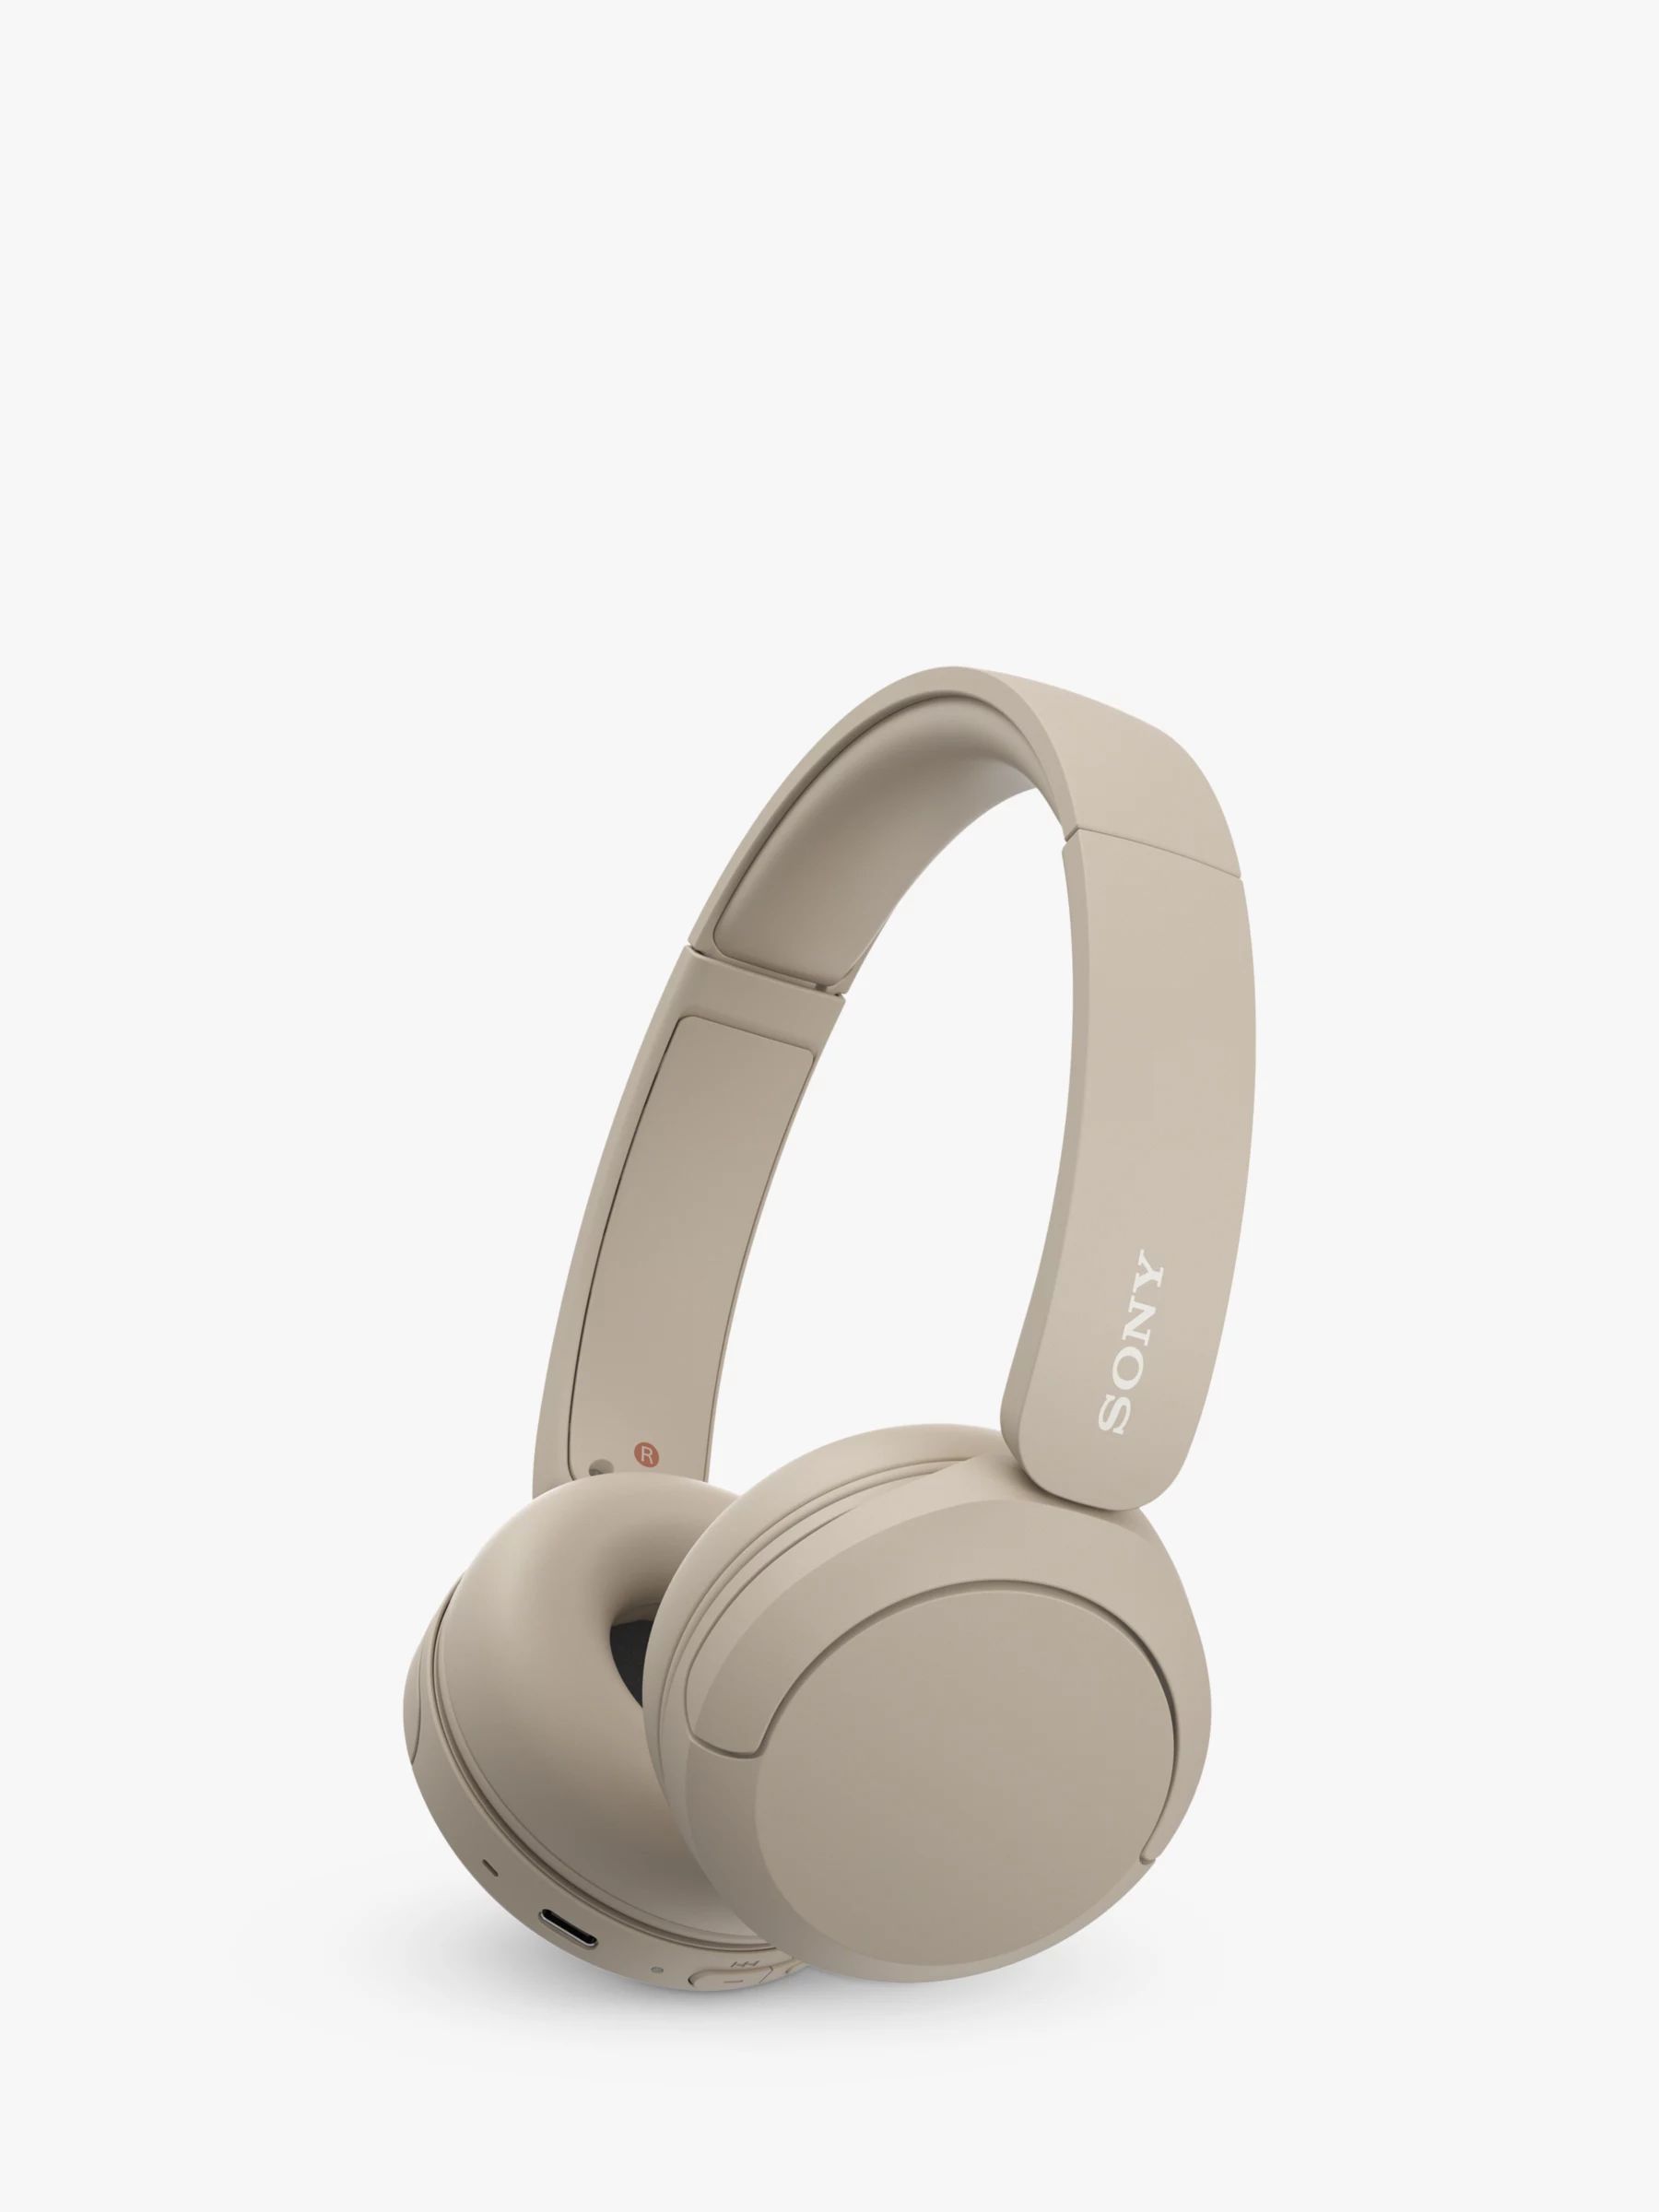 Sony WH-CH520 Bluetooth Wireless On-Ear Headphones with Mic/Remote, Beige | John Lewis (UK)